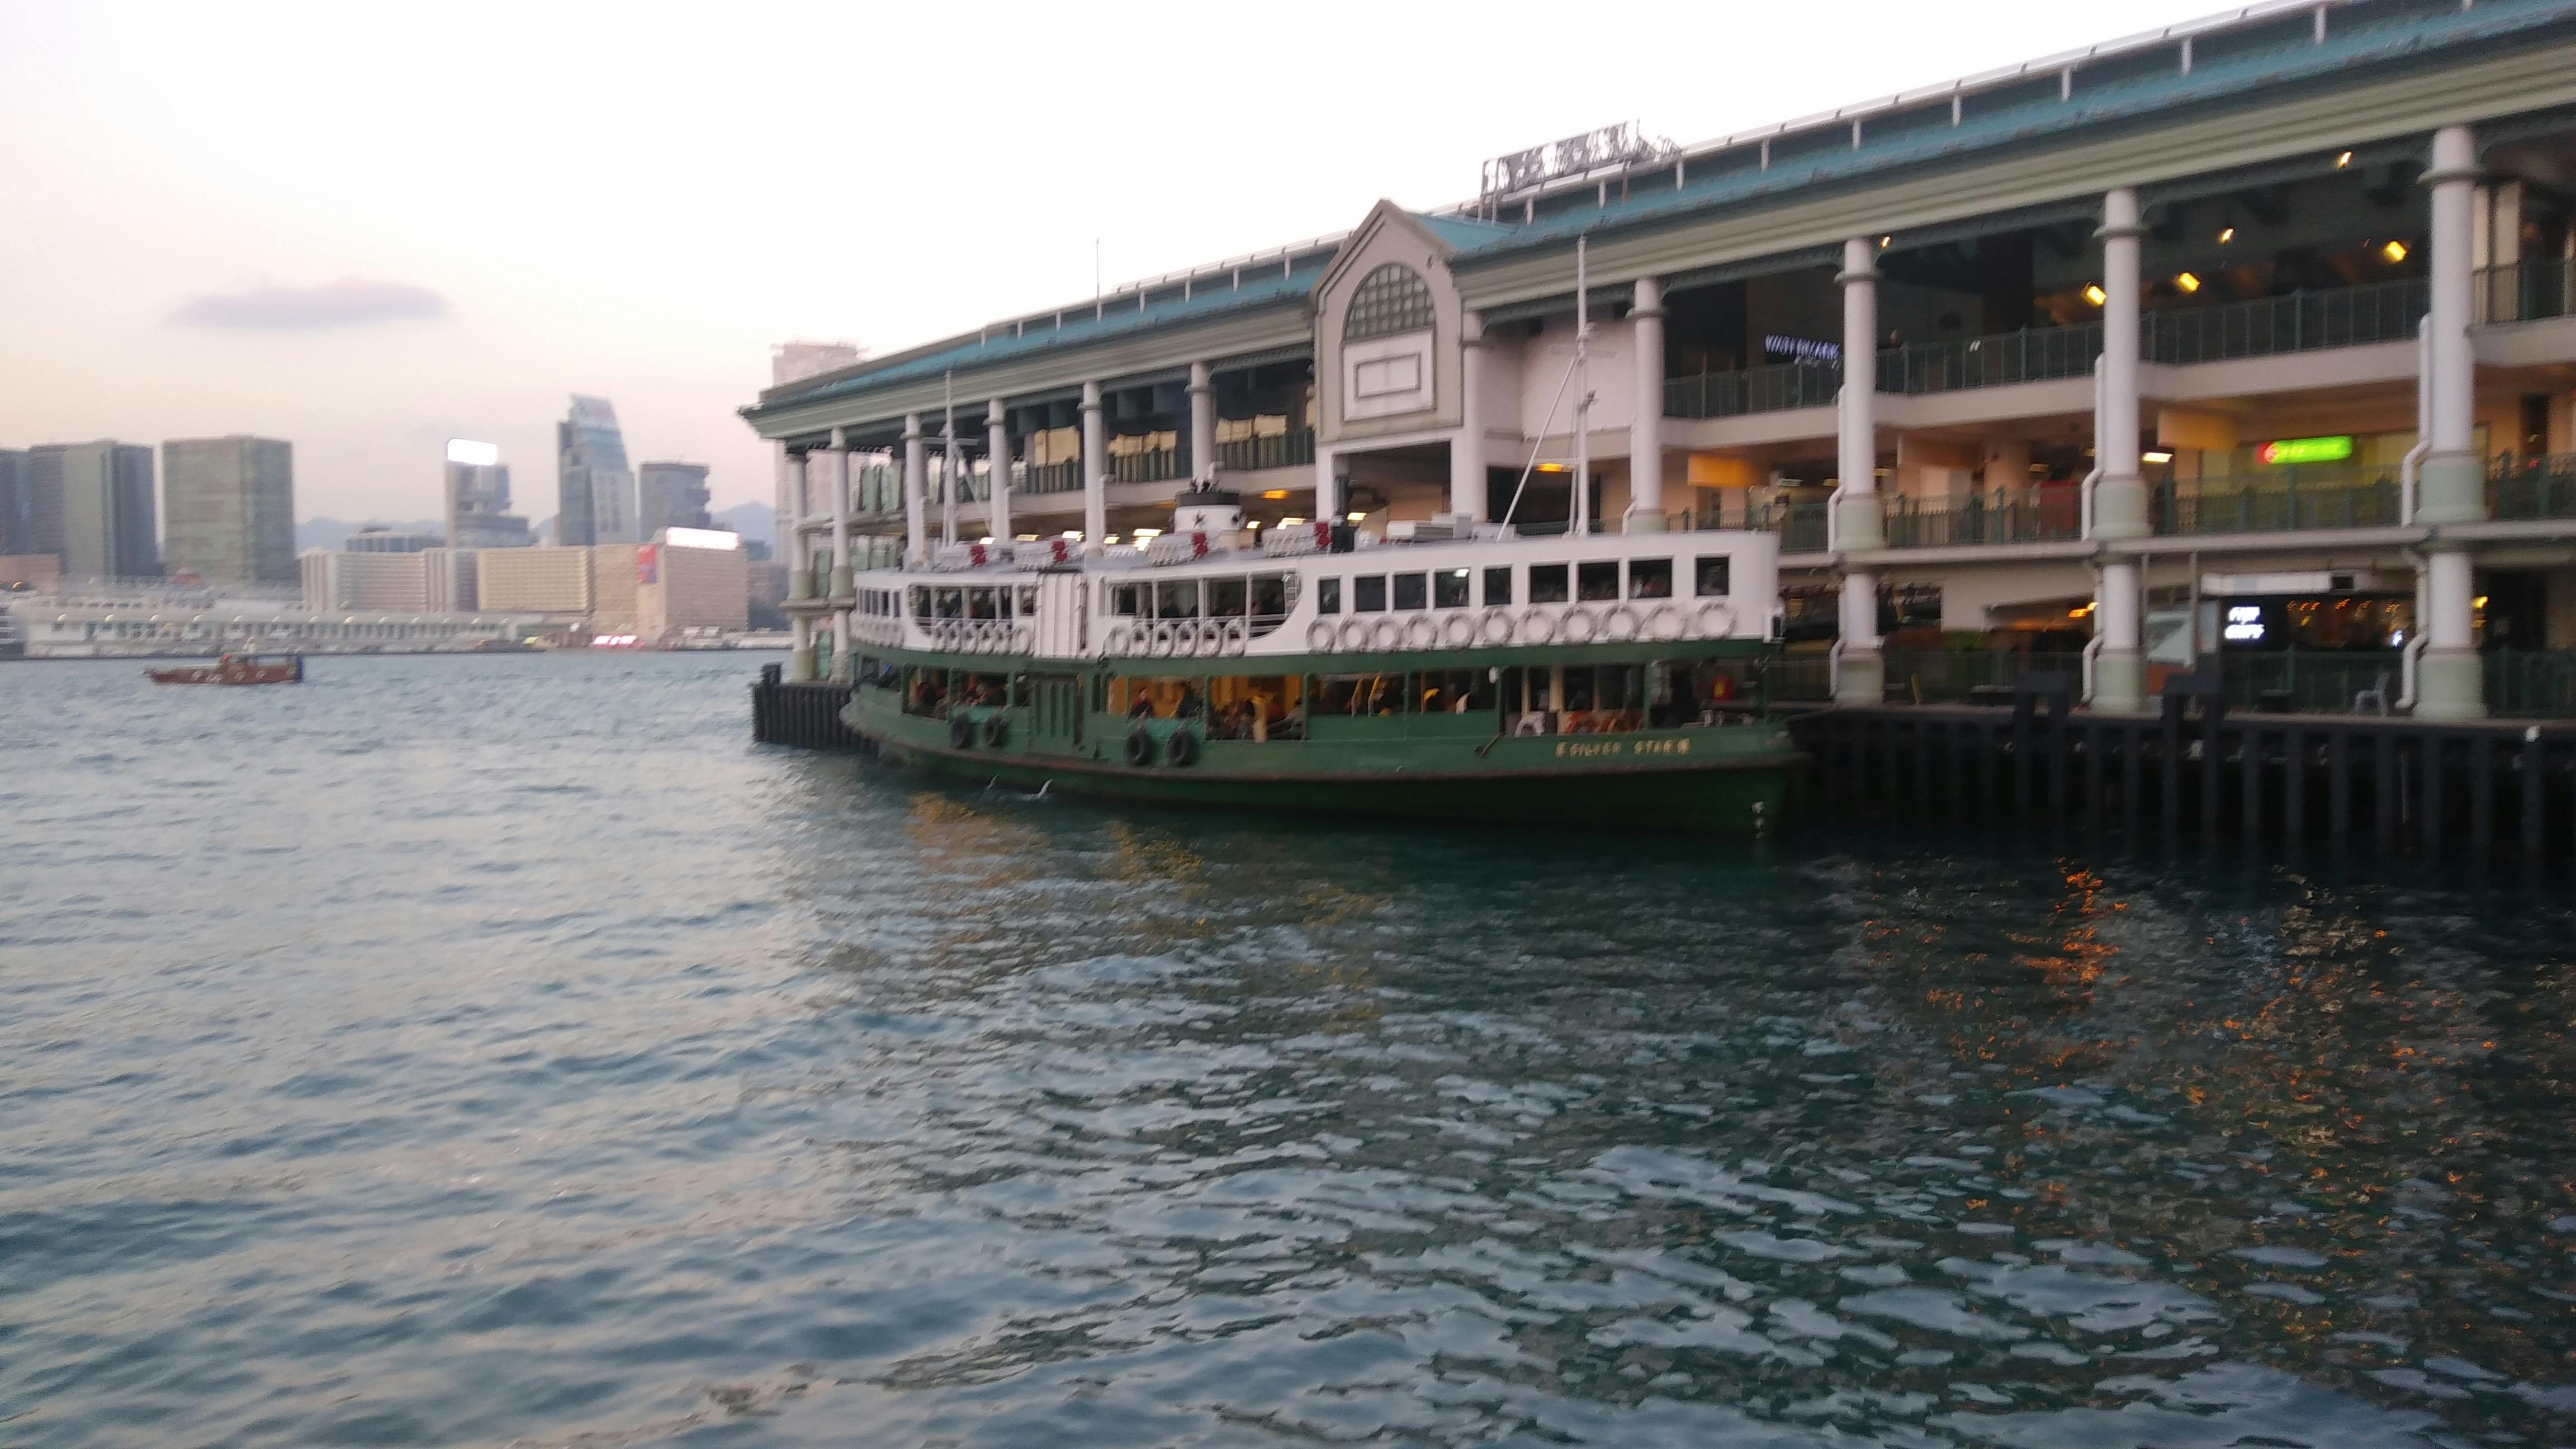 Free stock photo of star ferry